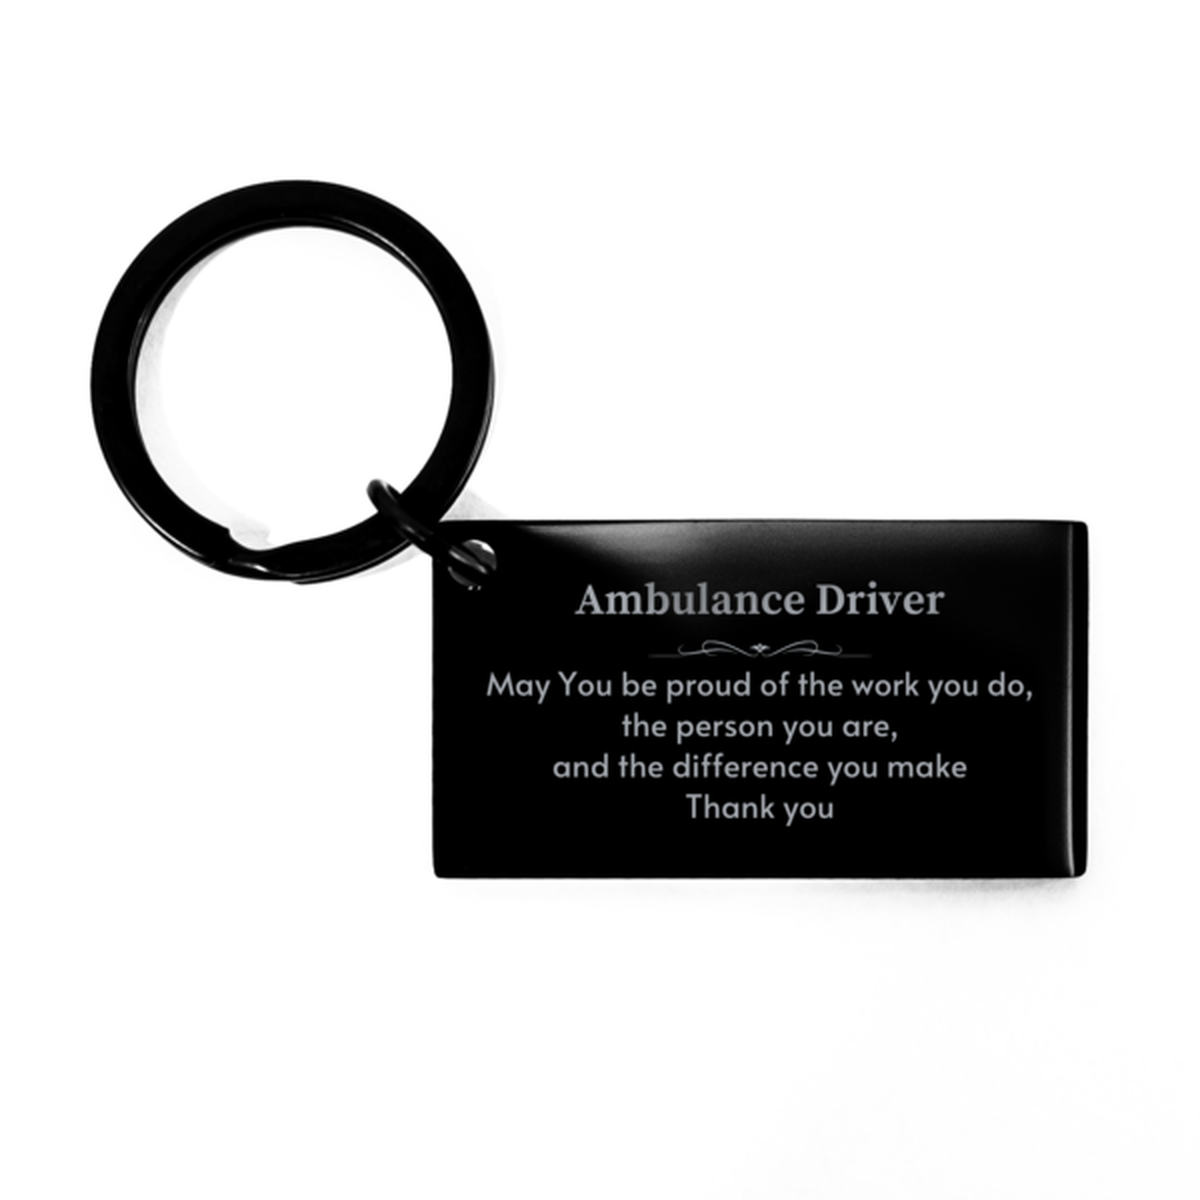 Heartwarming Keychain Retirement Coworkers Gifts for Ambulance Driver, Chiropractor May You be proud of the work you do, the person you are Gifts for Boss Men Women Friends